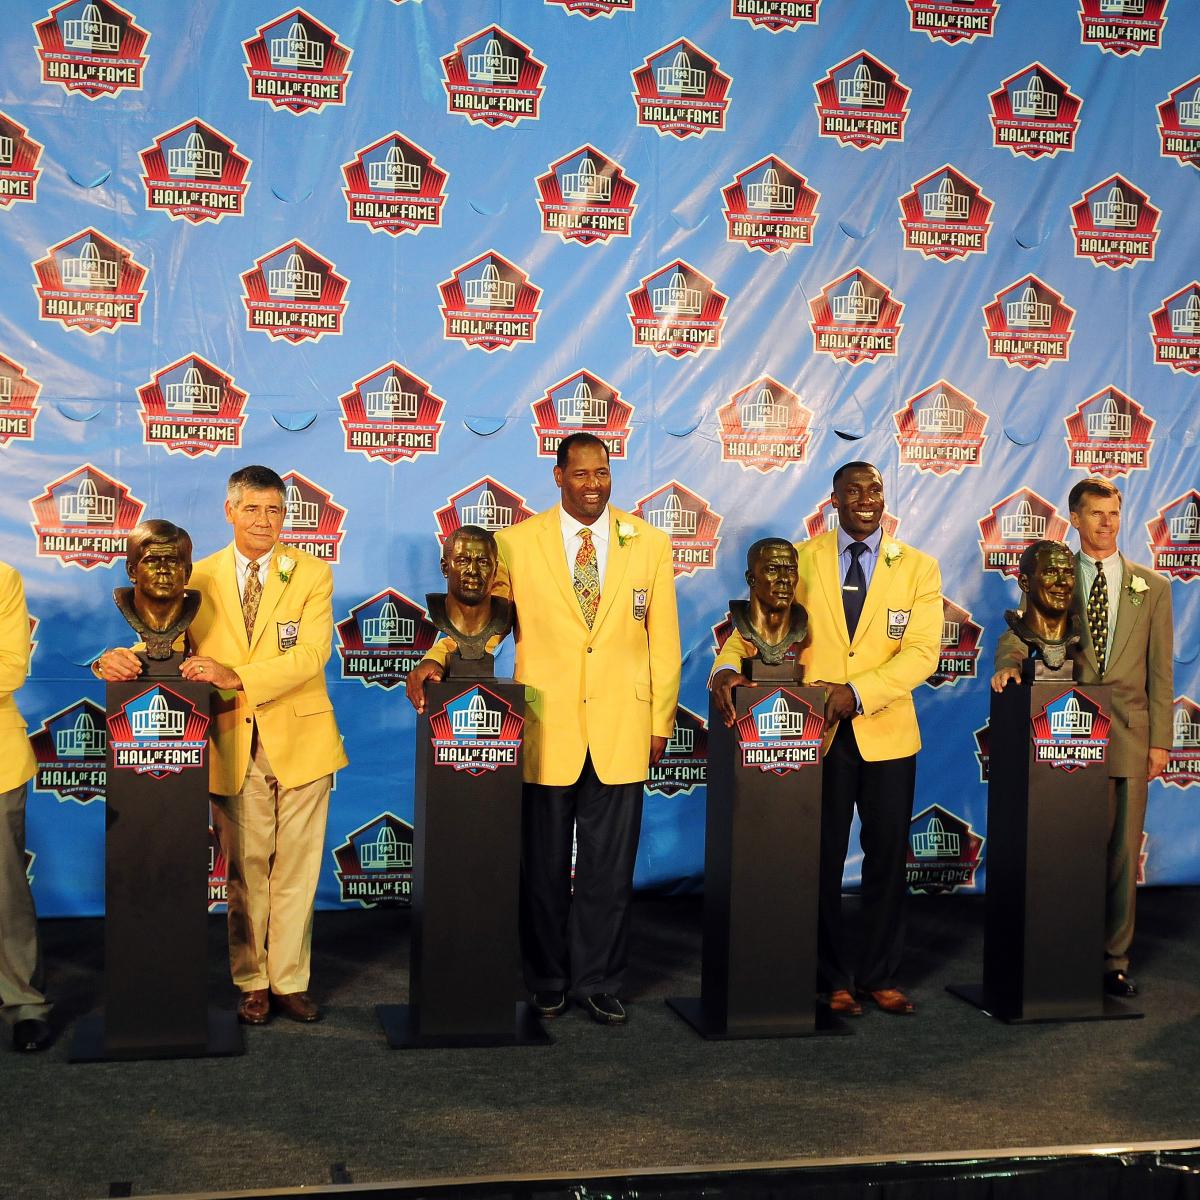 2012 Pro Football Hall of Fame: Complete List of Inductees to Canton | Bleacher Report ...1200 x 1200